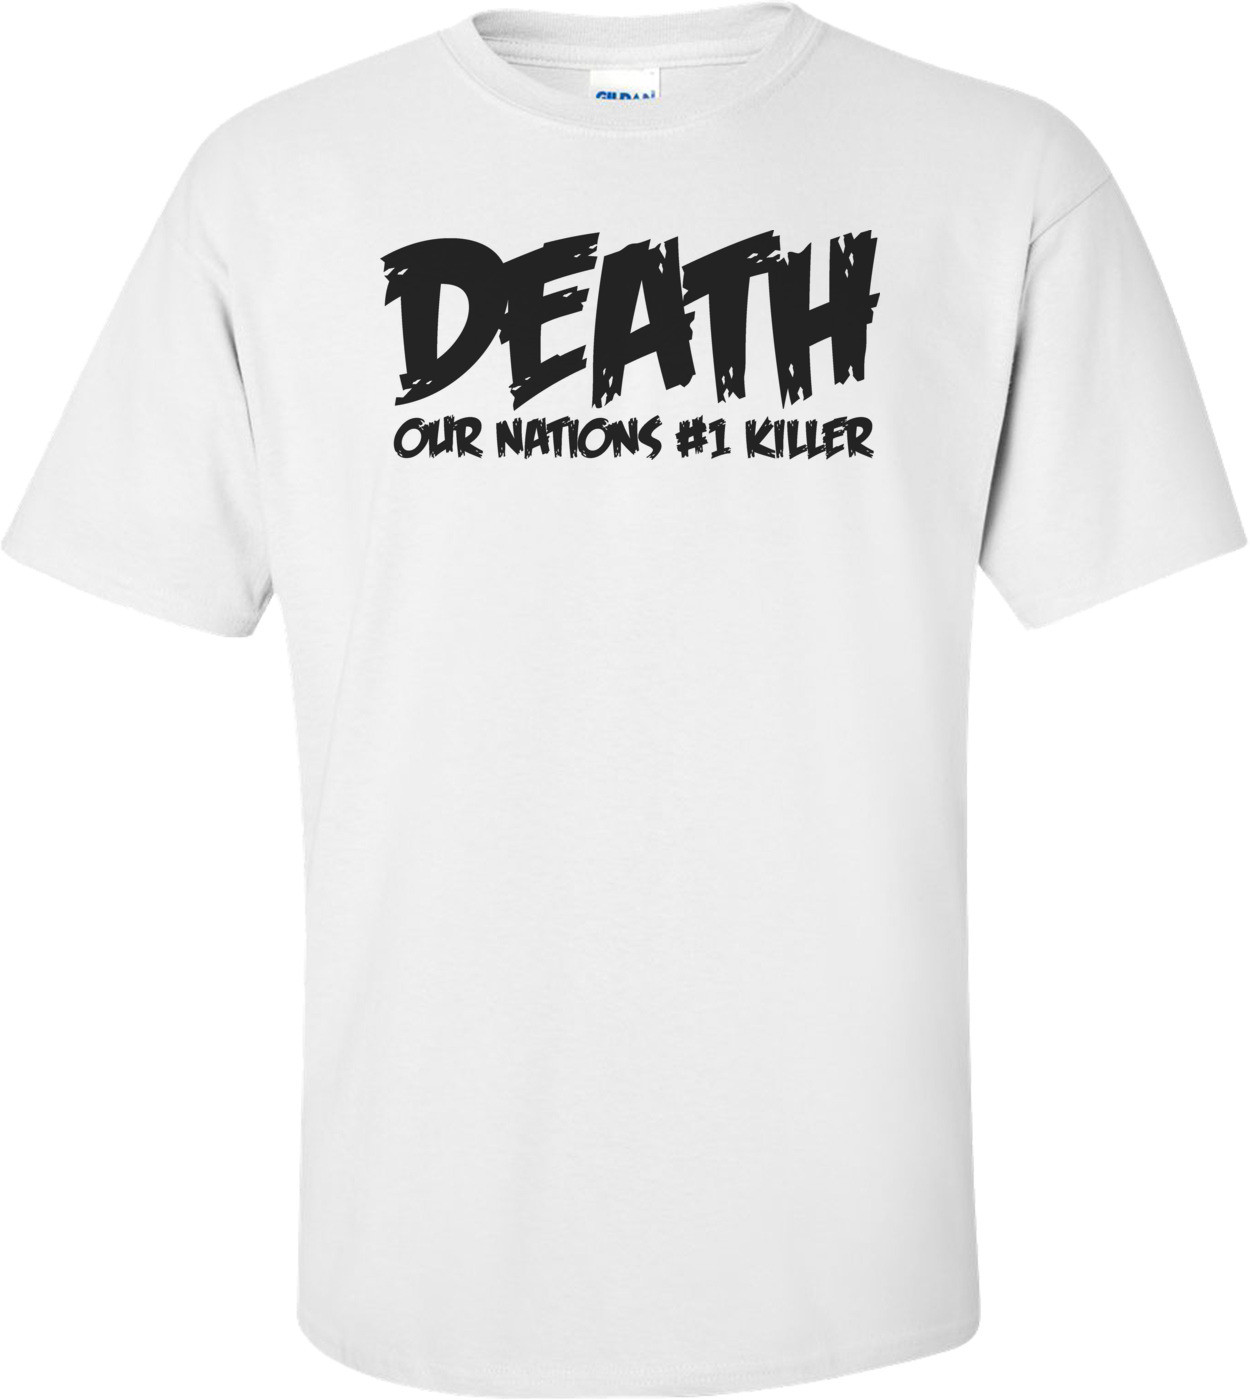 Death Our Nations #1 Killer Funny